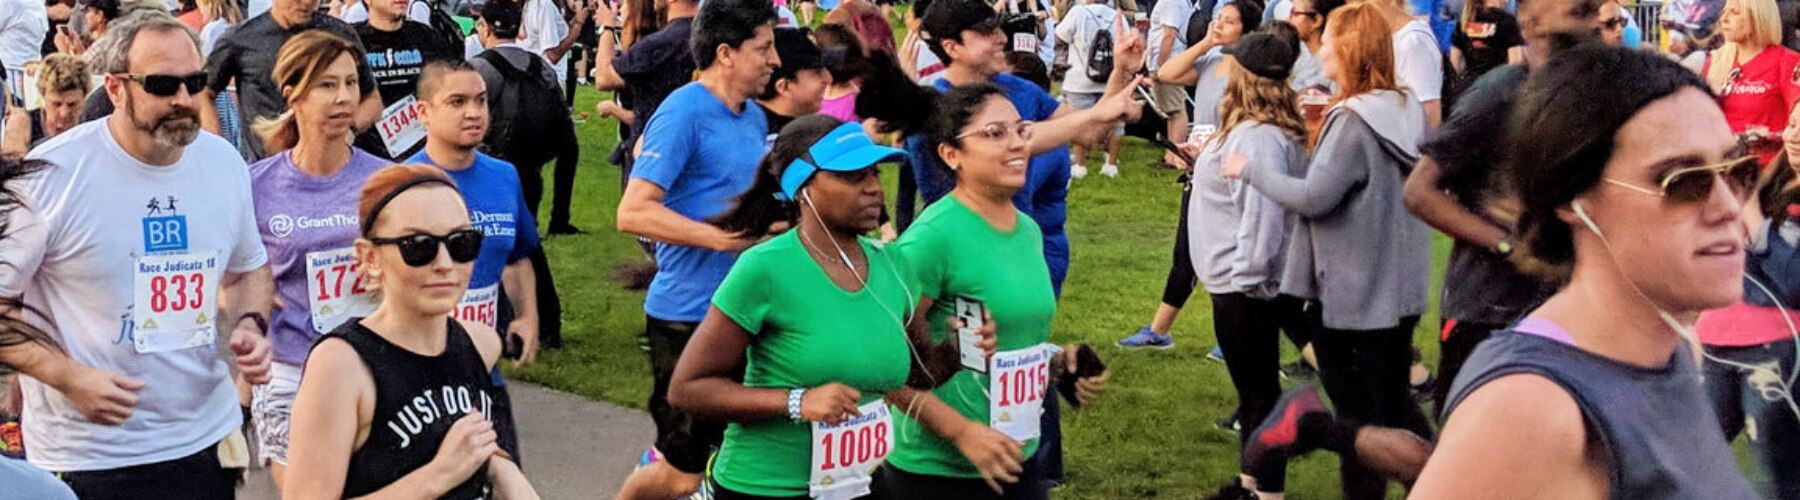 Runners at the Race Judicata in 2018